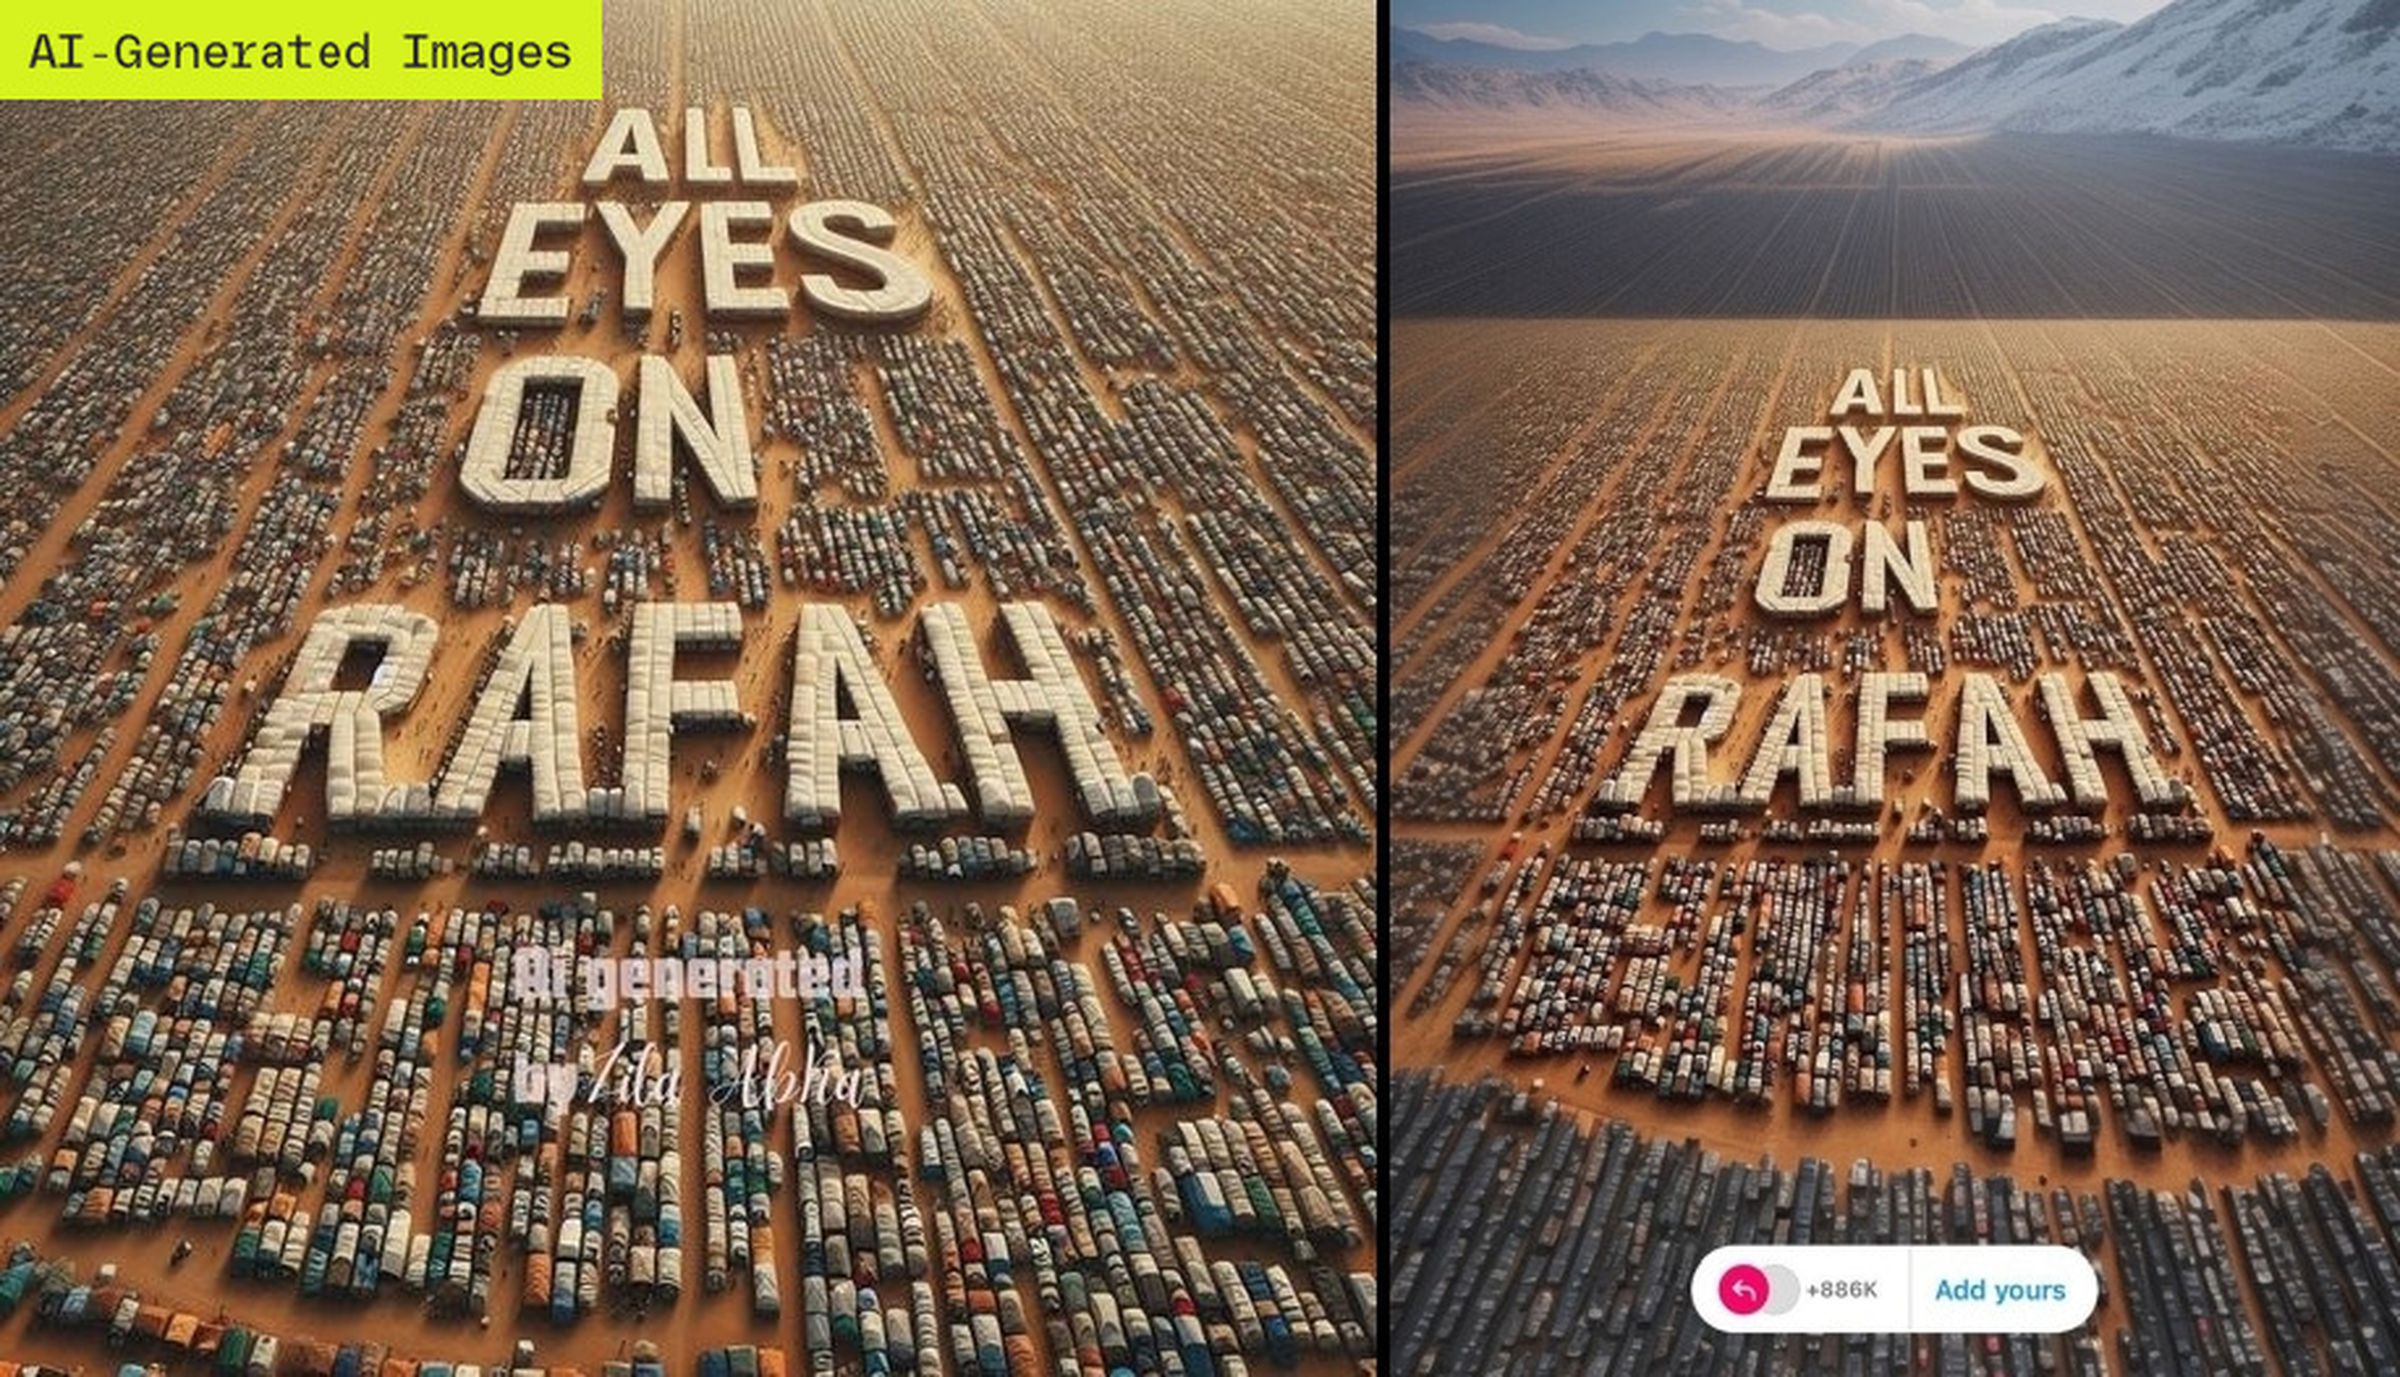 Composite image of two AI-generated images with the words “All Eyes on Rafah” surrounded by tents.